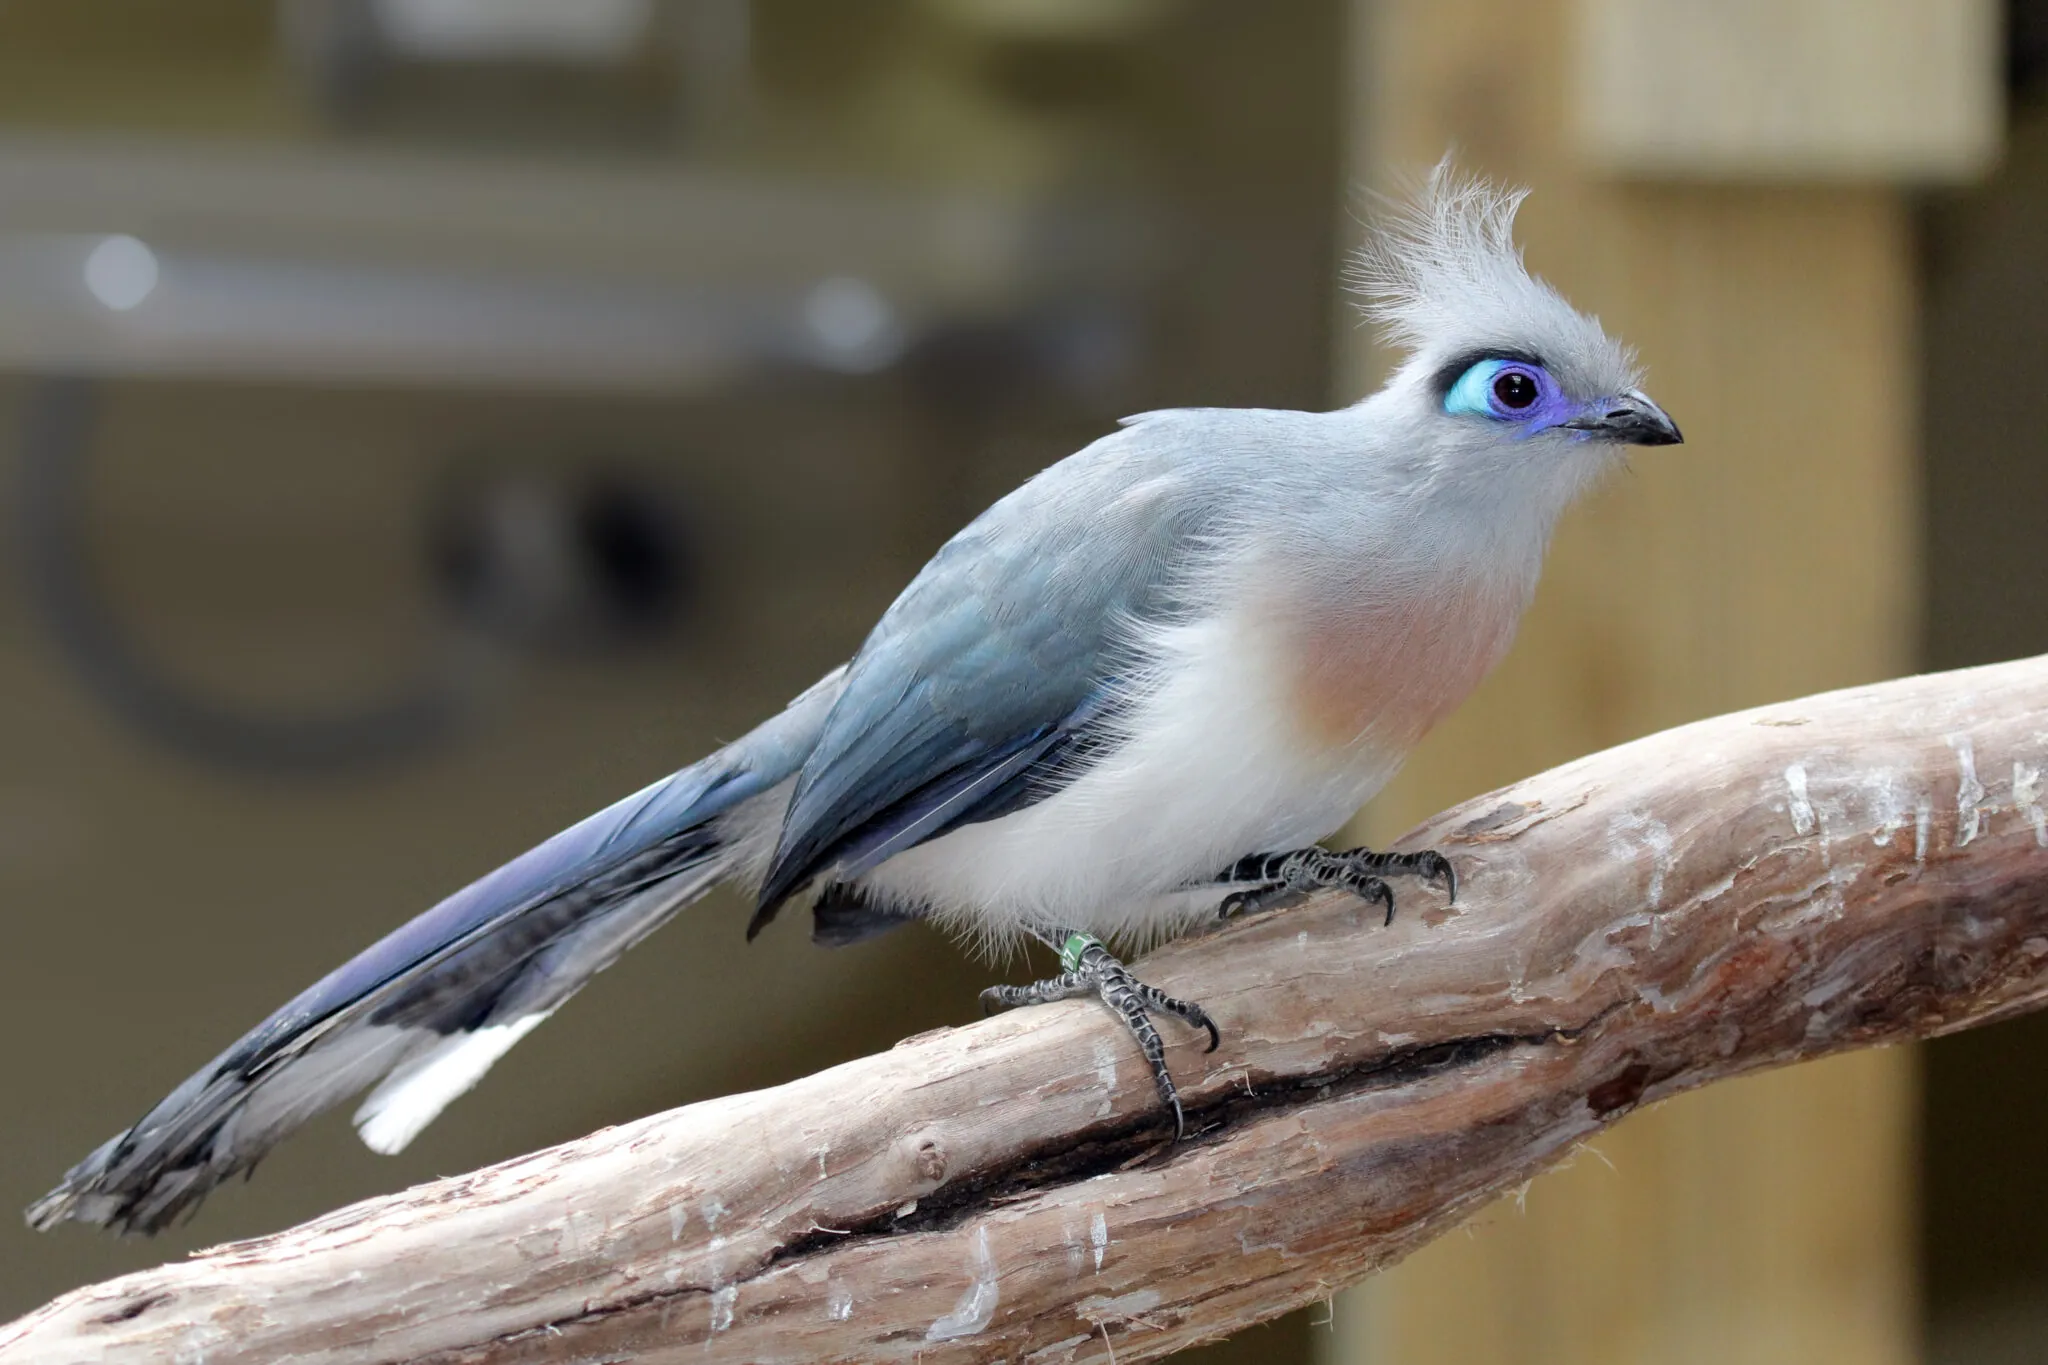 Crested coua on a branch